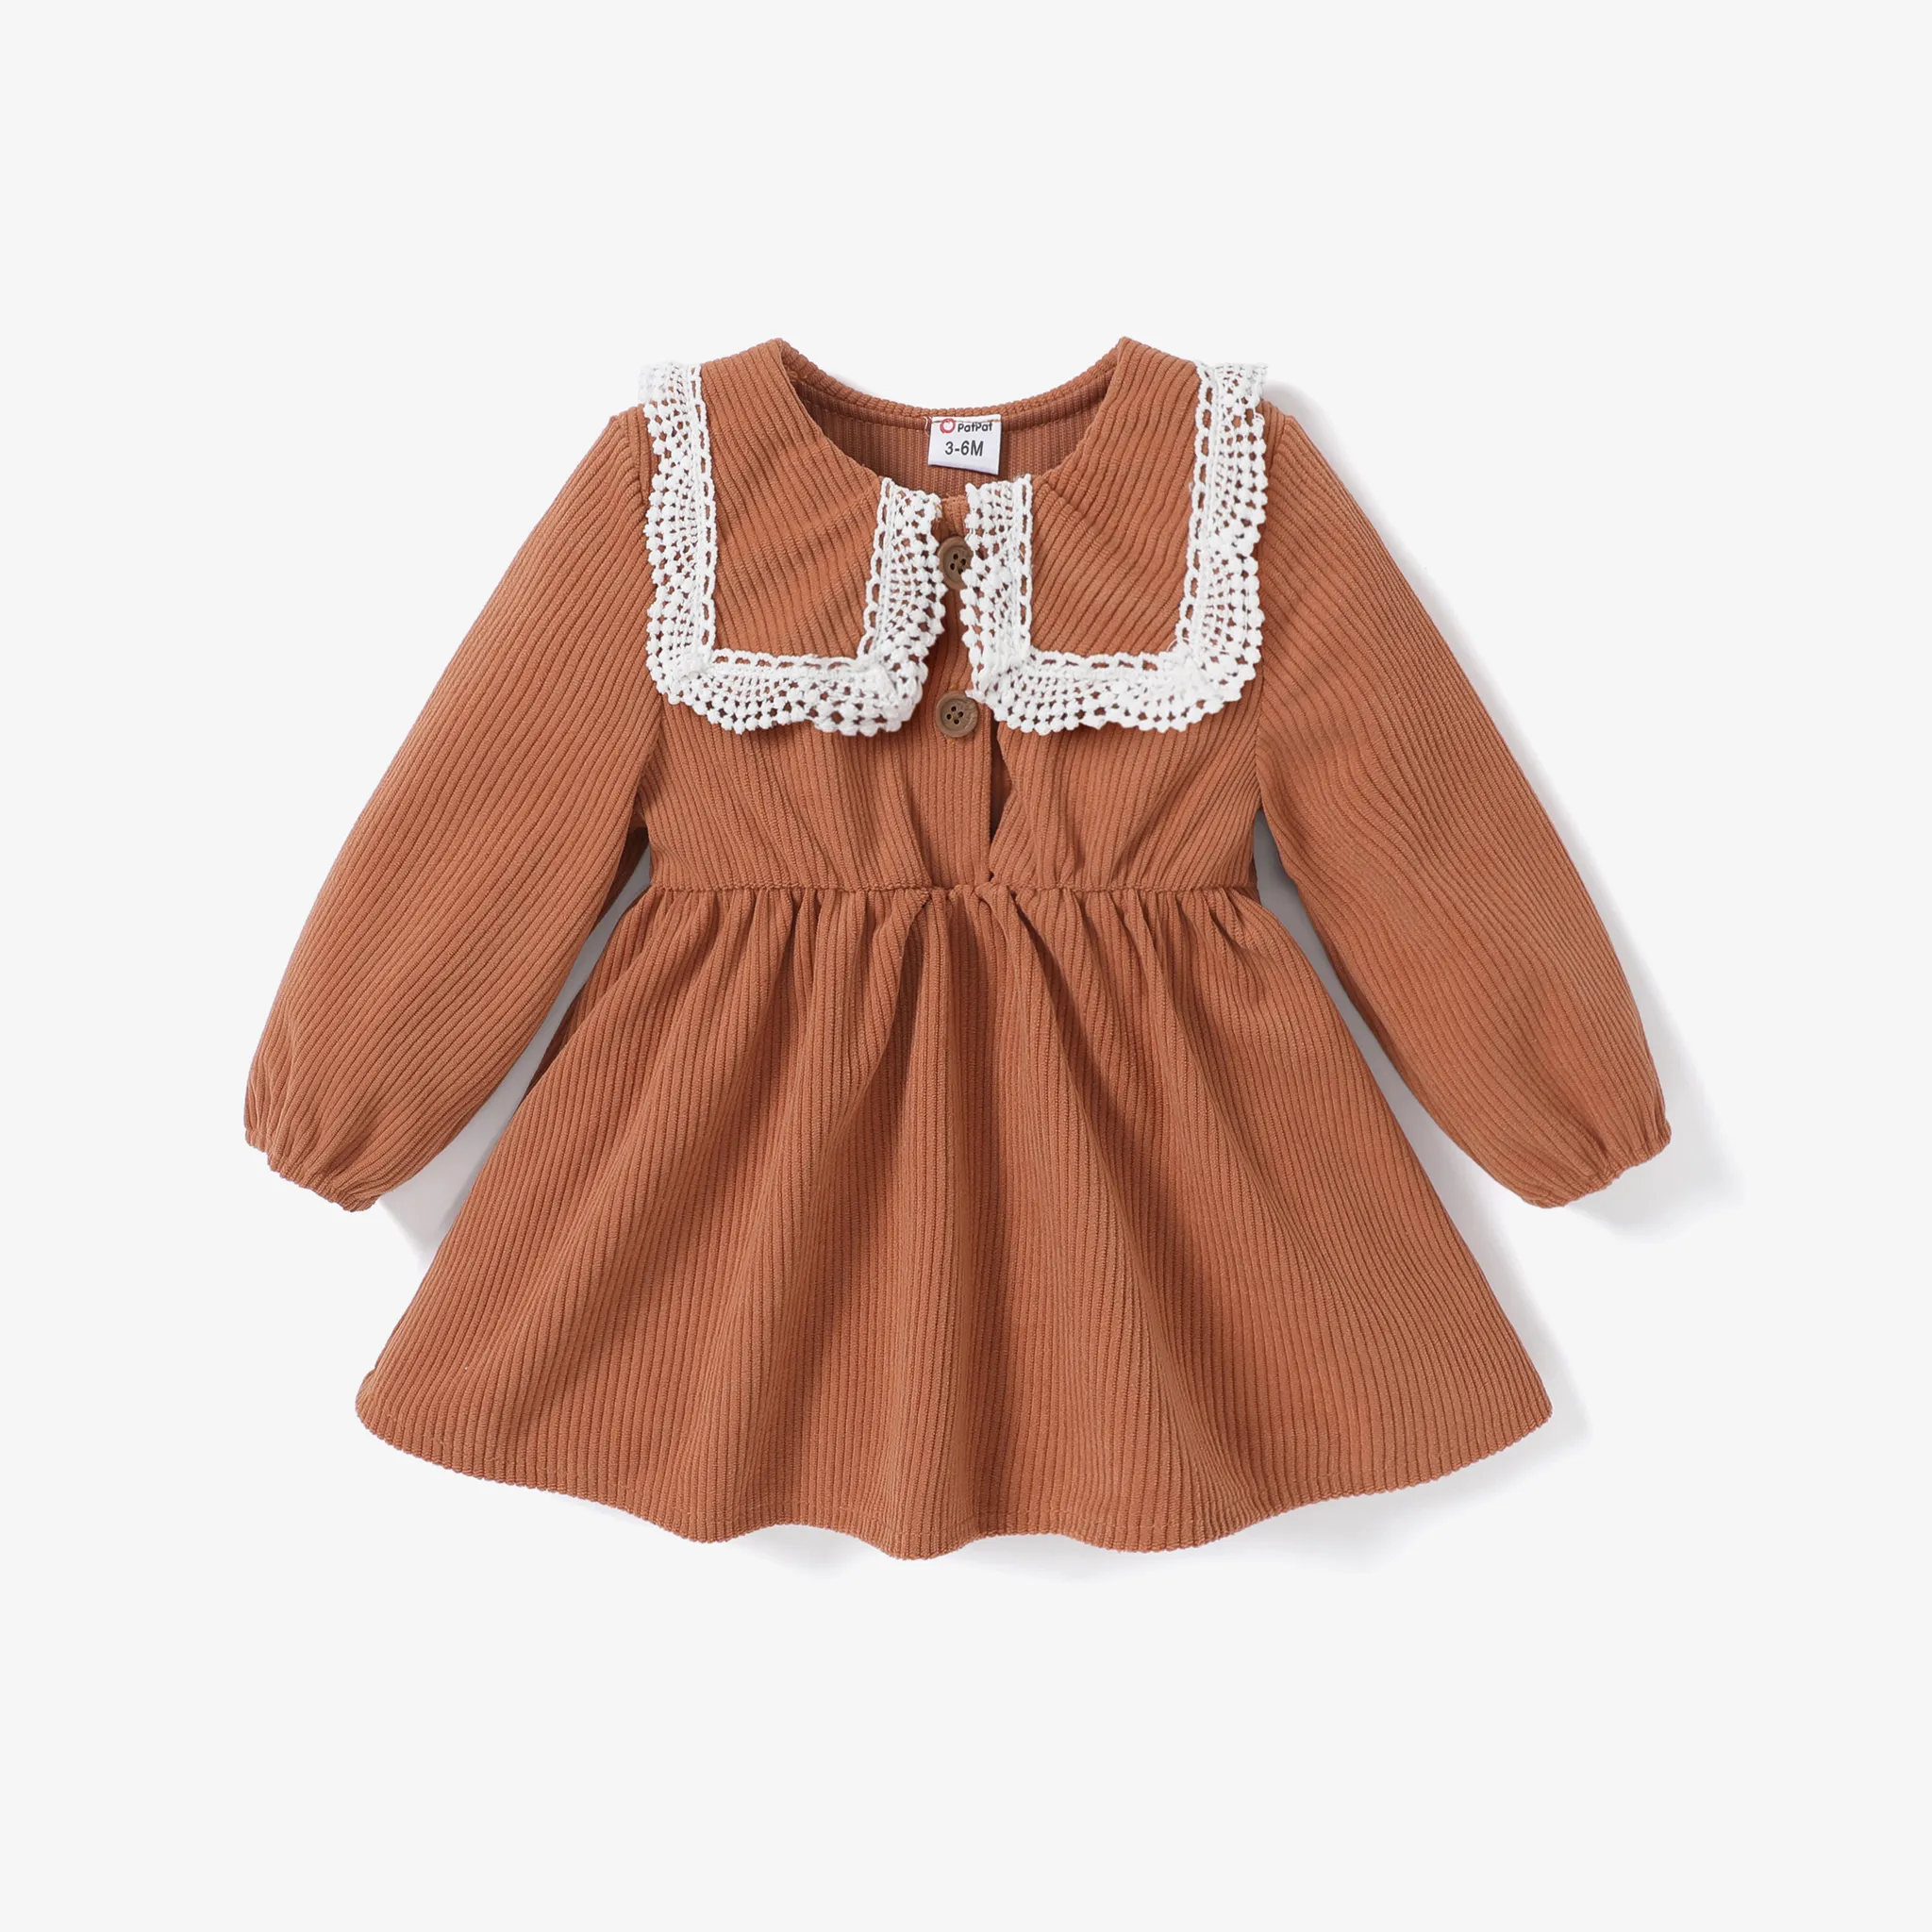 Baby Girls Solid Color Dress With Exquisite Lace Collar